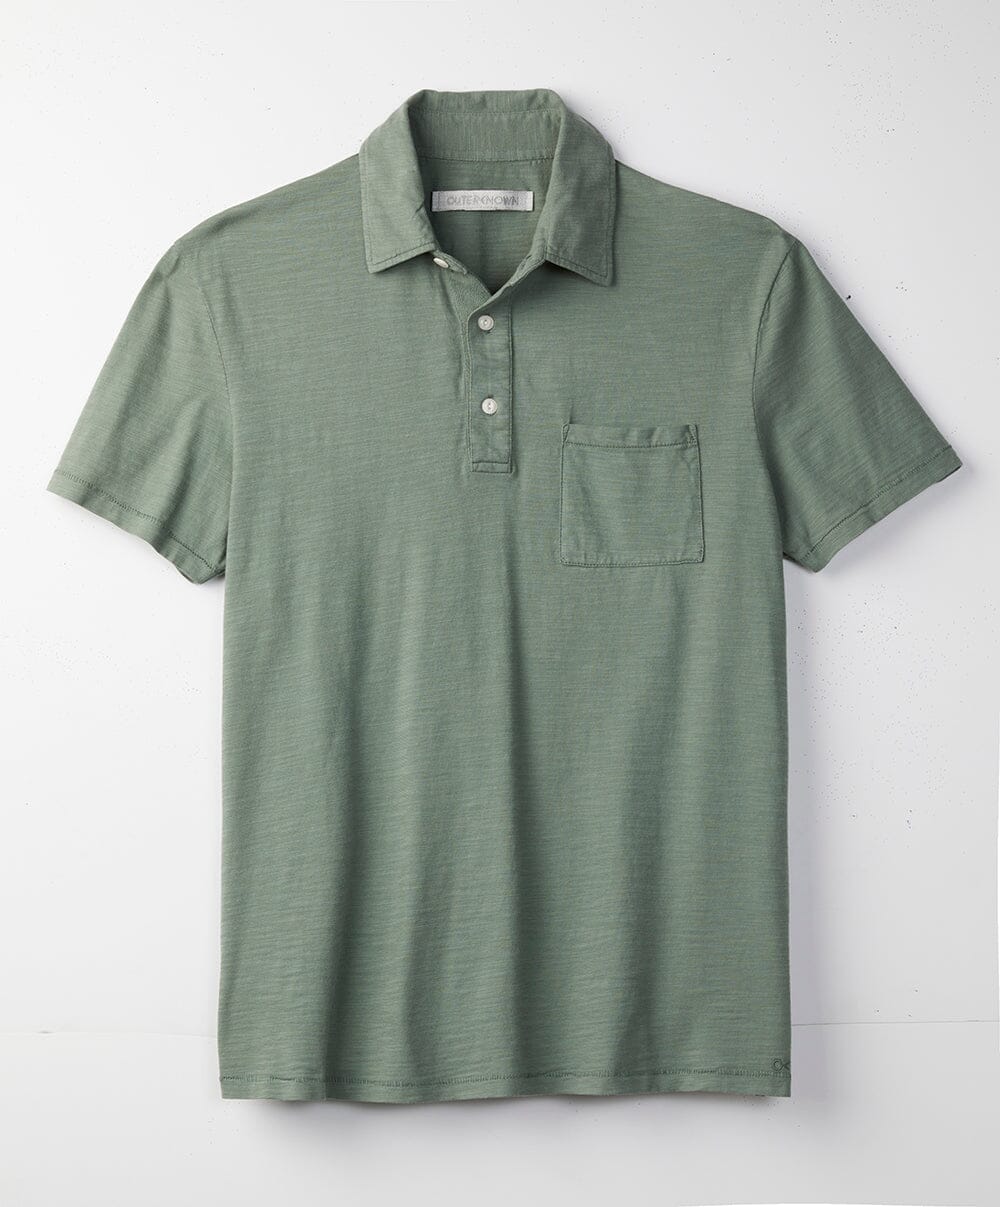 Outerknown Saltwater Slub Polo Shirt M Shirts OUTERKNOWN MENS 